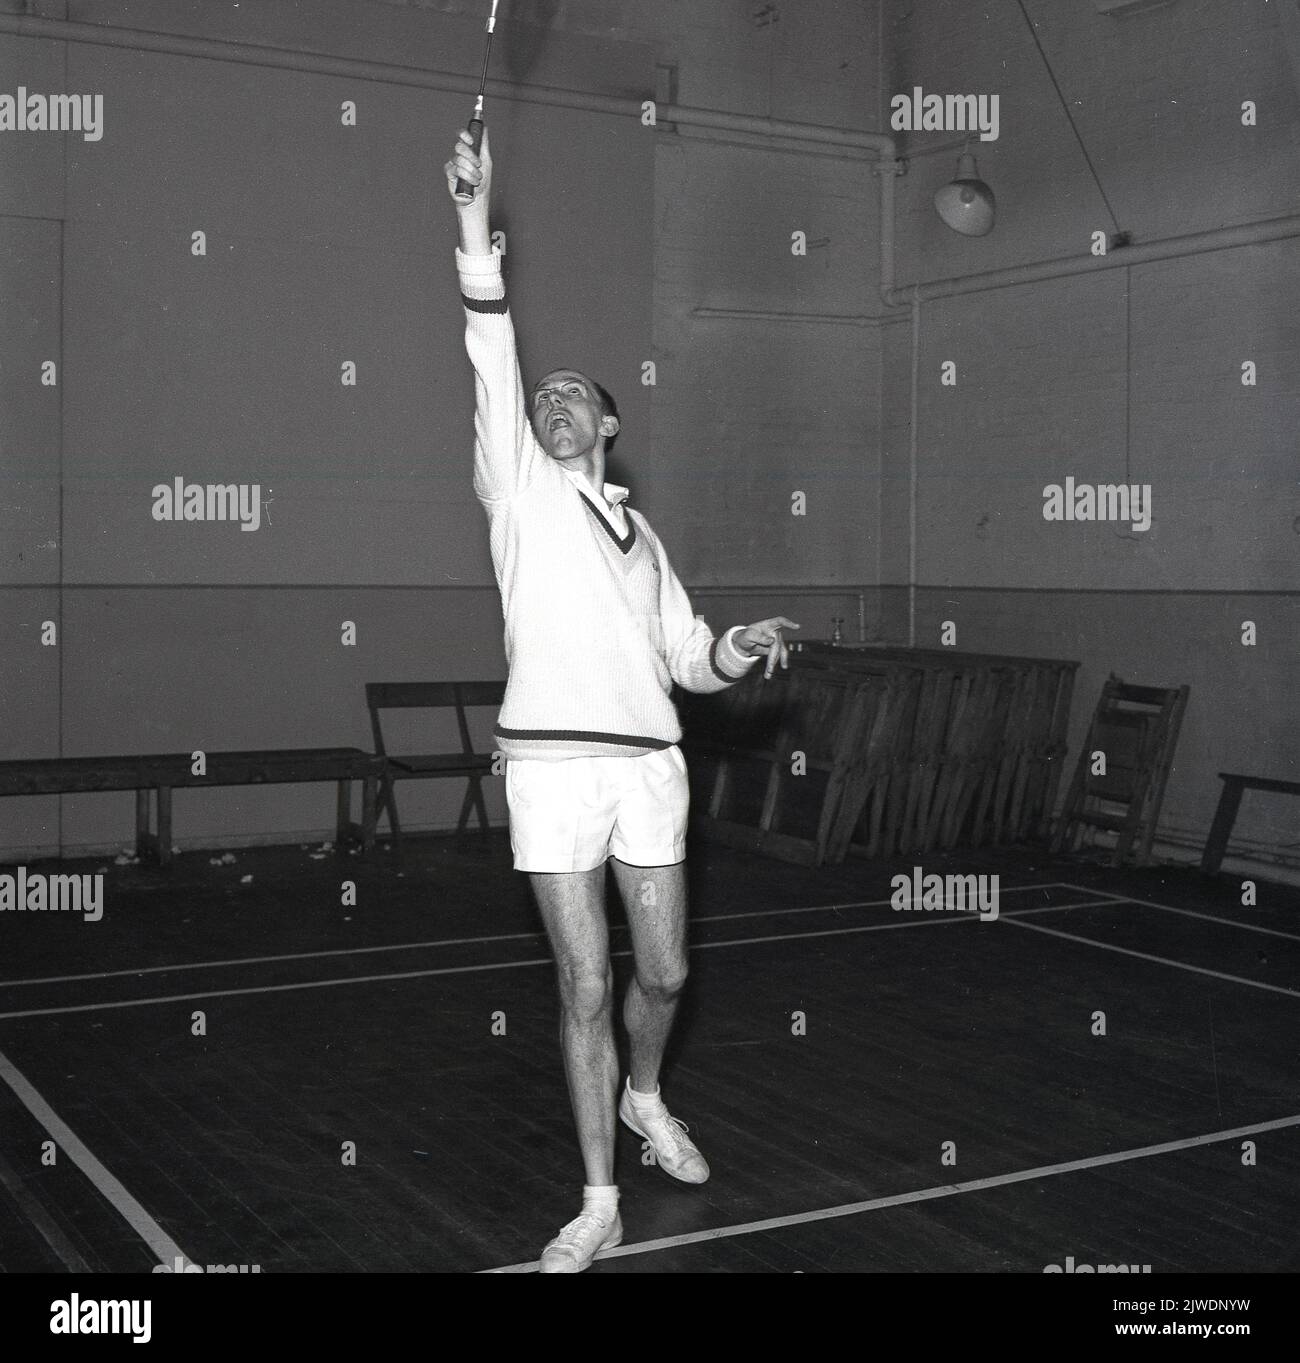 1965, historical, English male badminton player on court, stretching high to play a shot, Scotland, UK, wearing al v-neck sweater, shorts and traditional plimsolls. Stock Photo